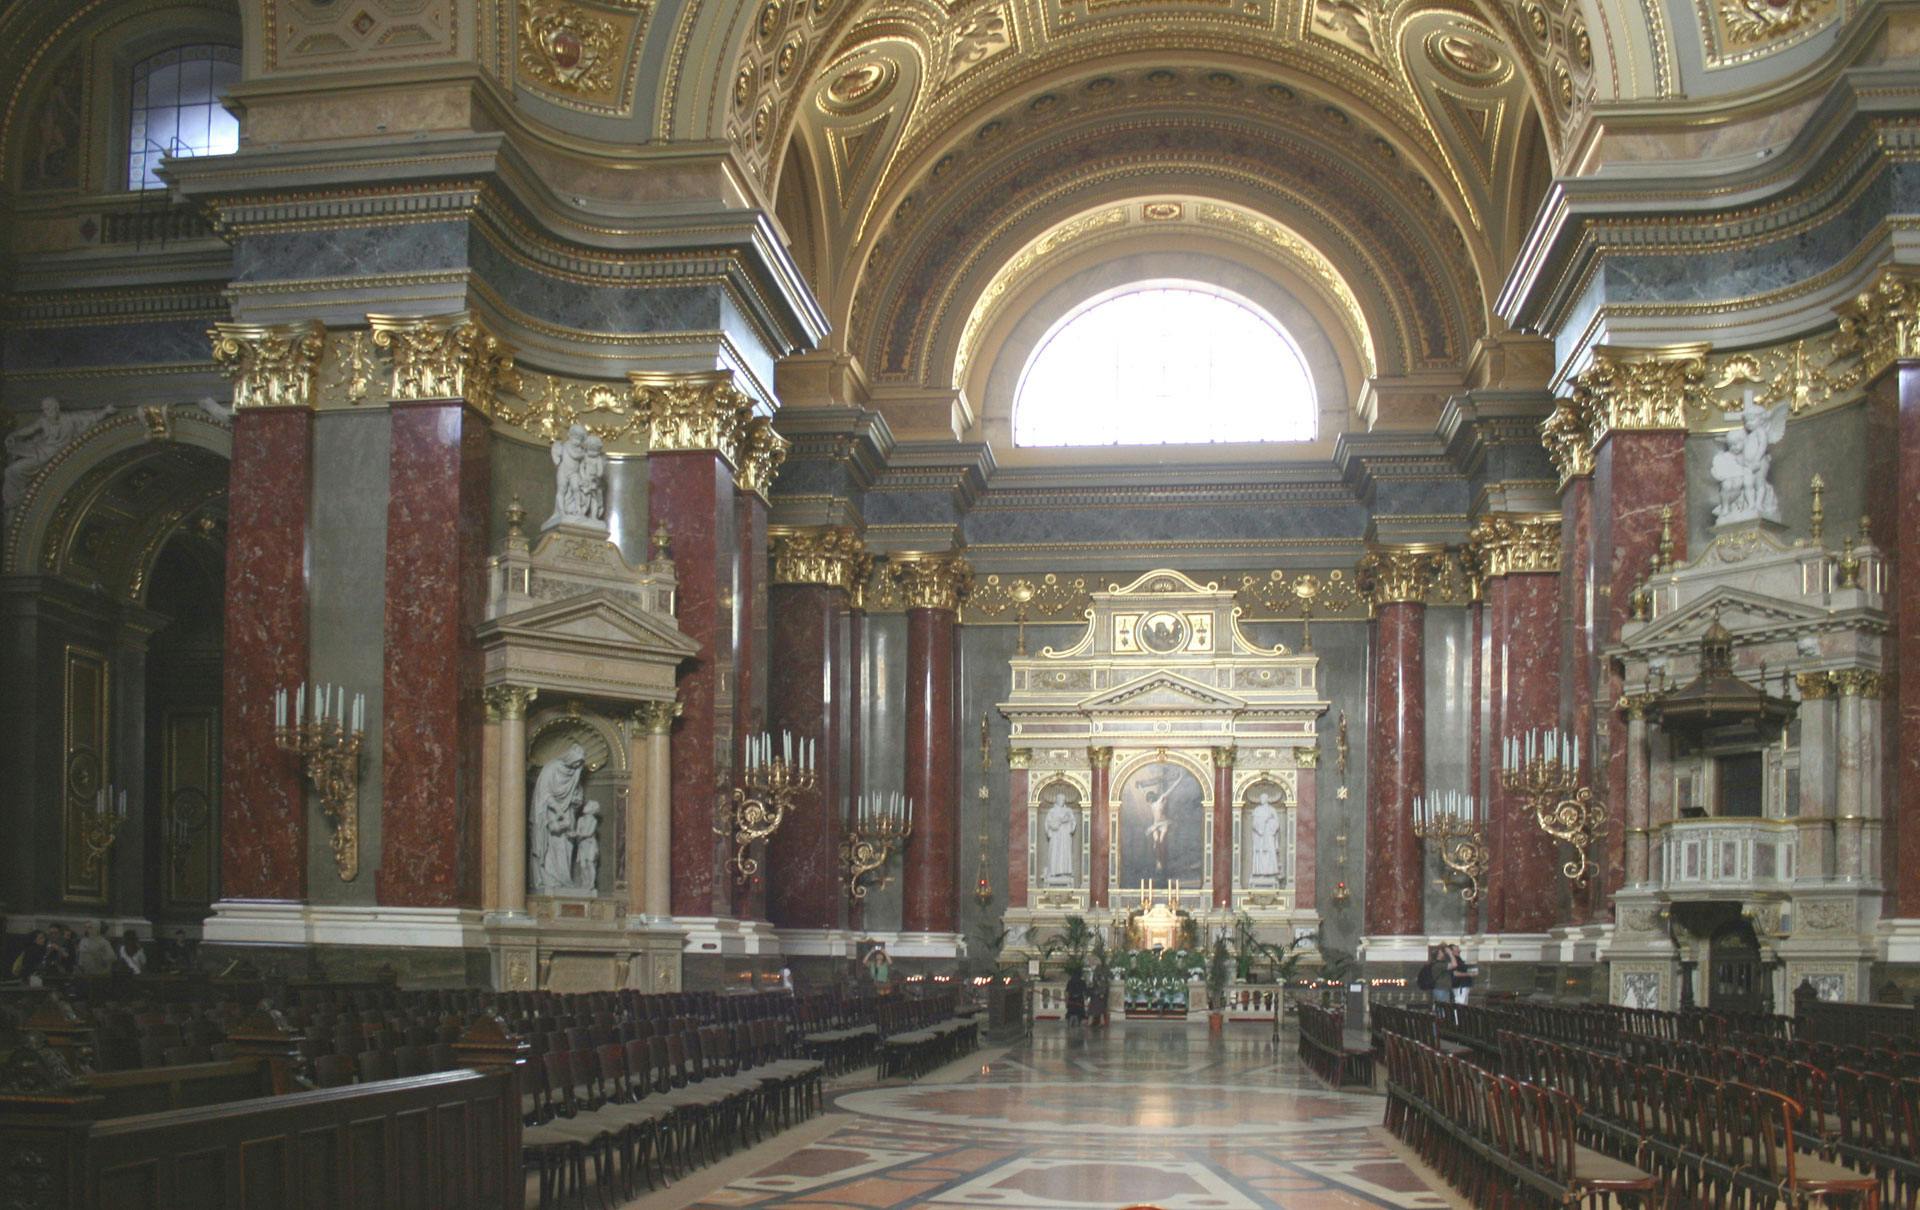 Skip the line escorted entrance ticket to St Stephen's Basilica in Budapest Musement